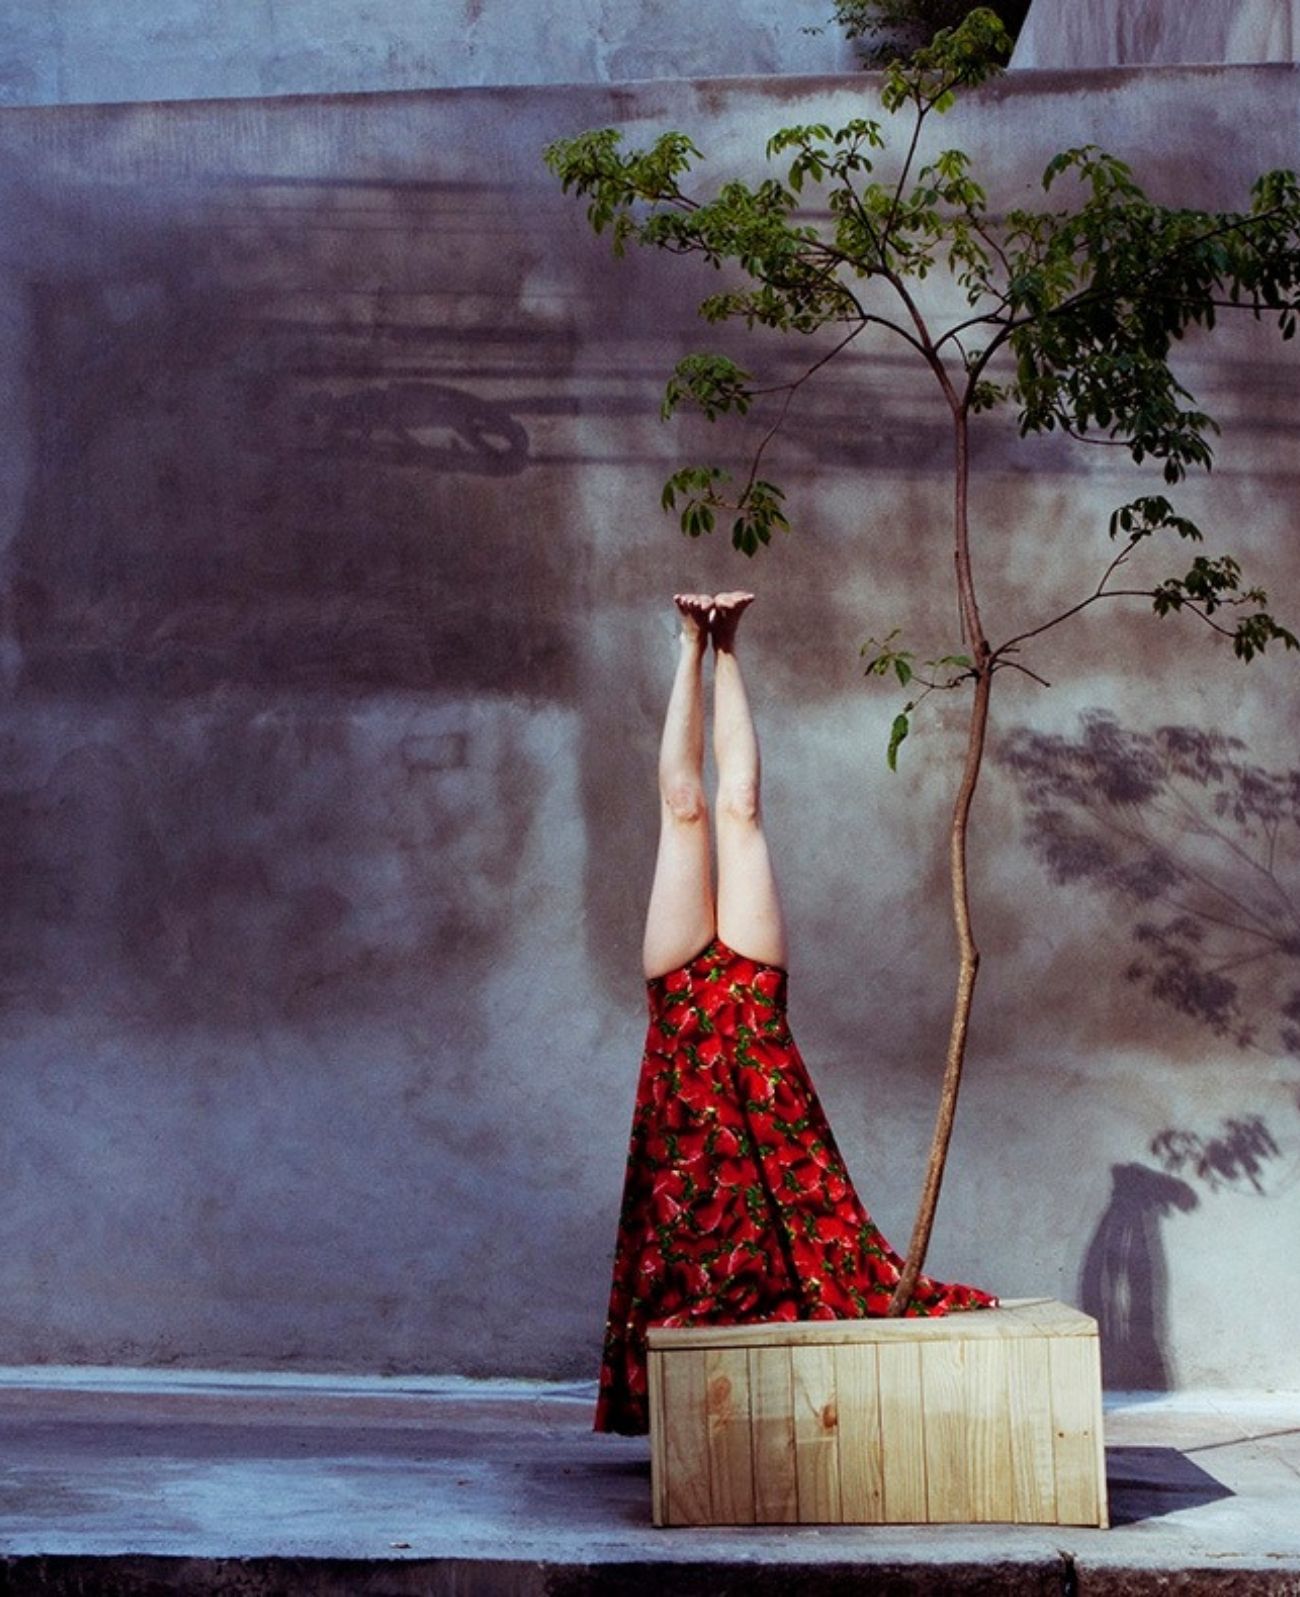 Performer stand upside down next to a tree as part of an outdoor performance